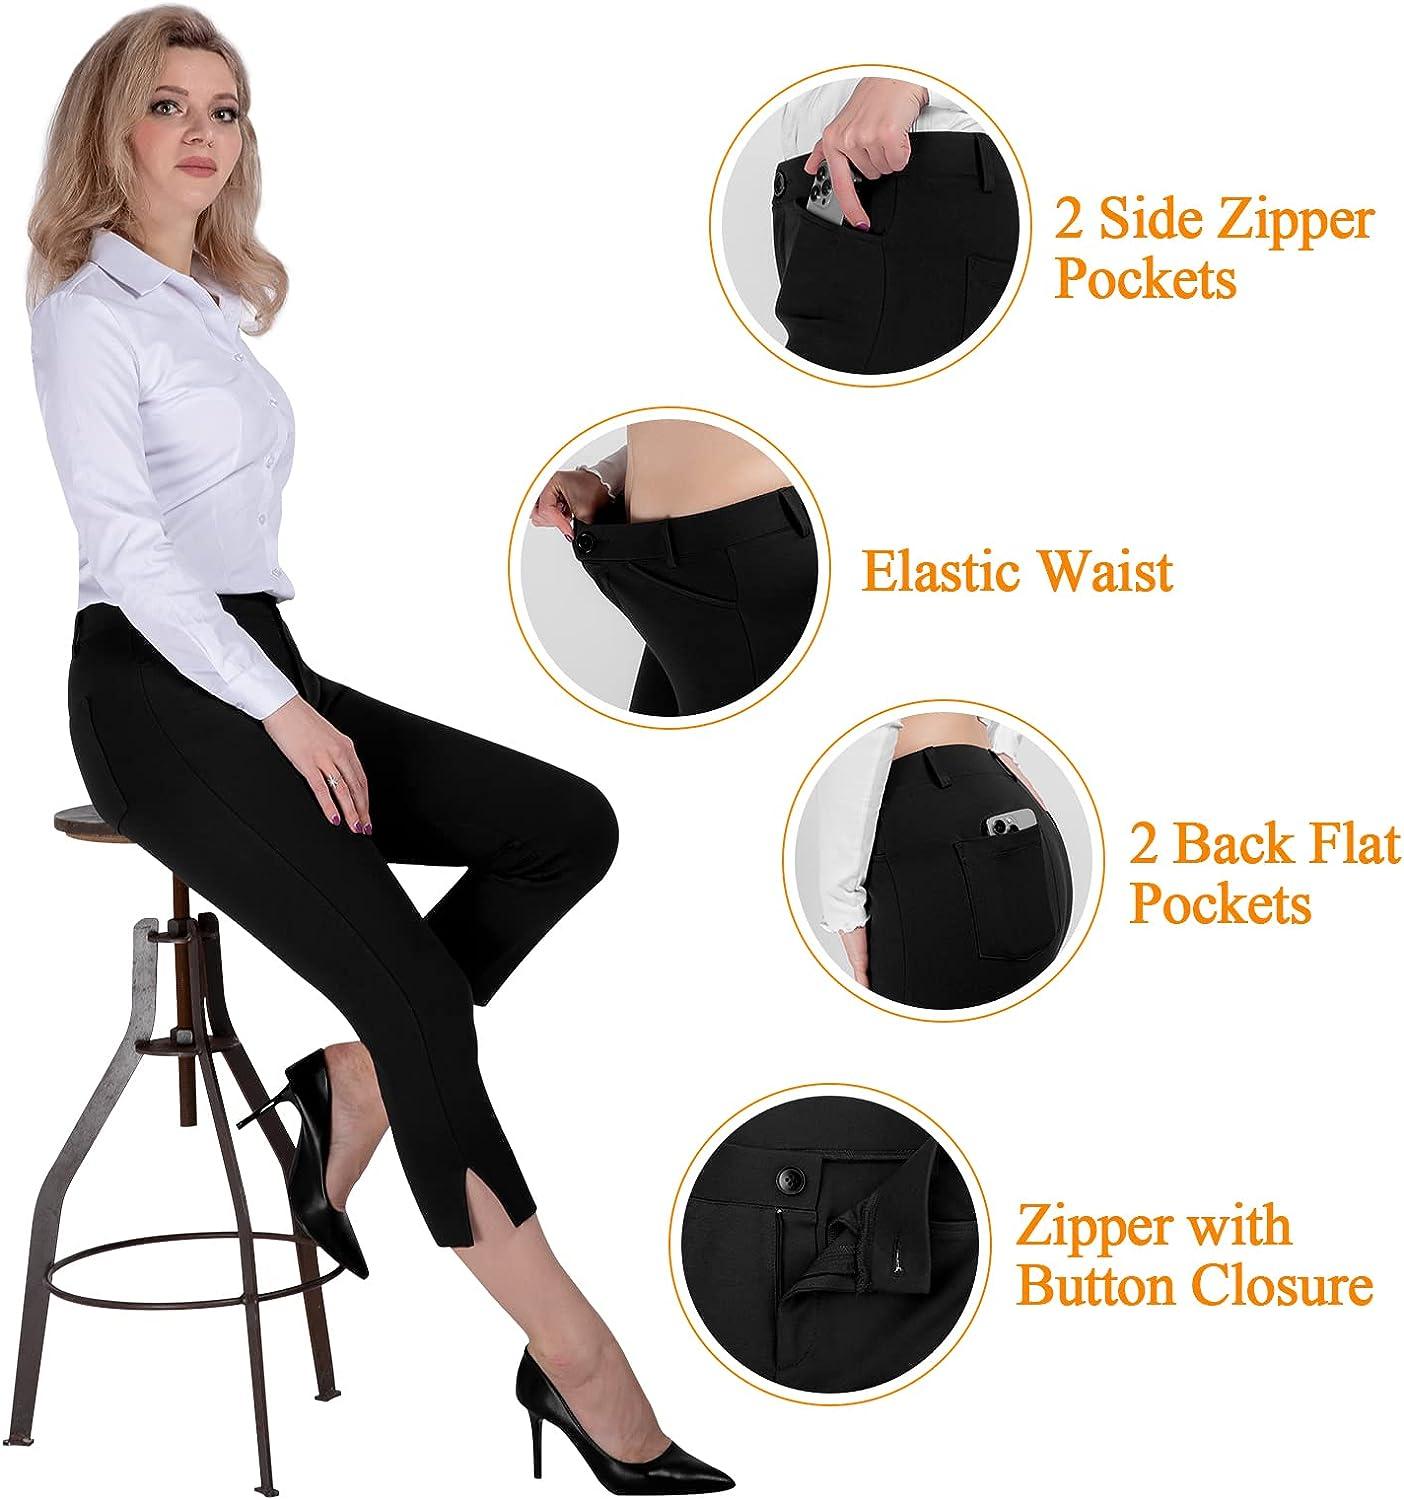 PUWEER Capri Pants for Women Dressy Business Casual Stretchy Slim